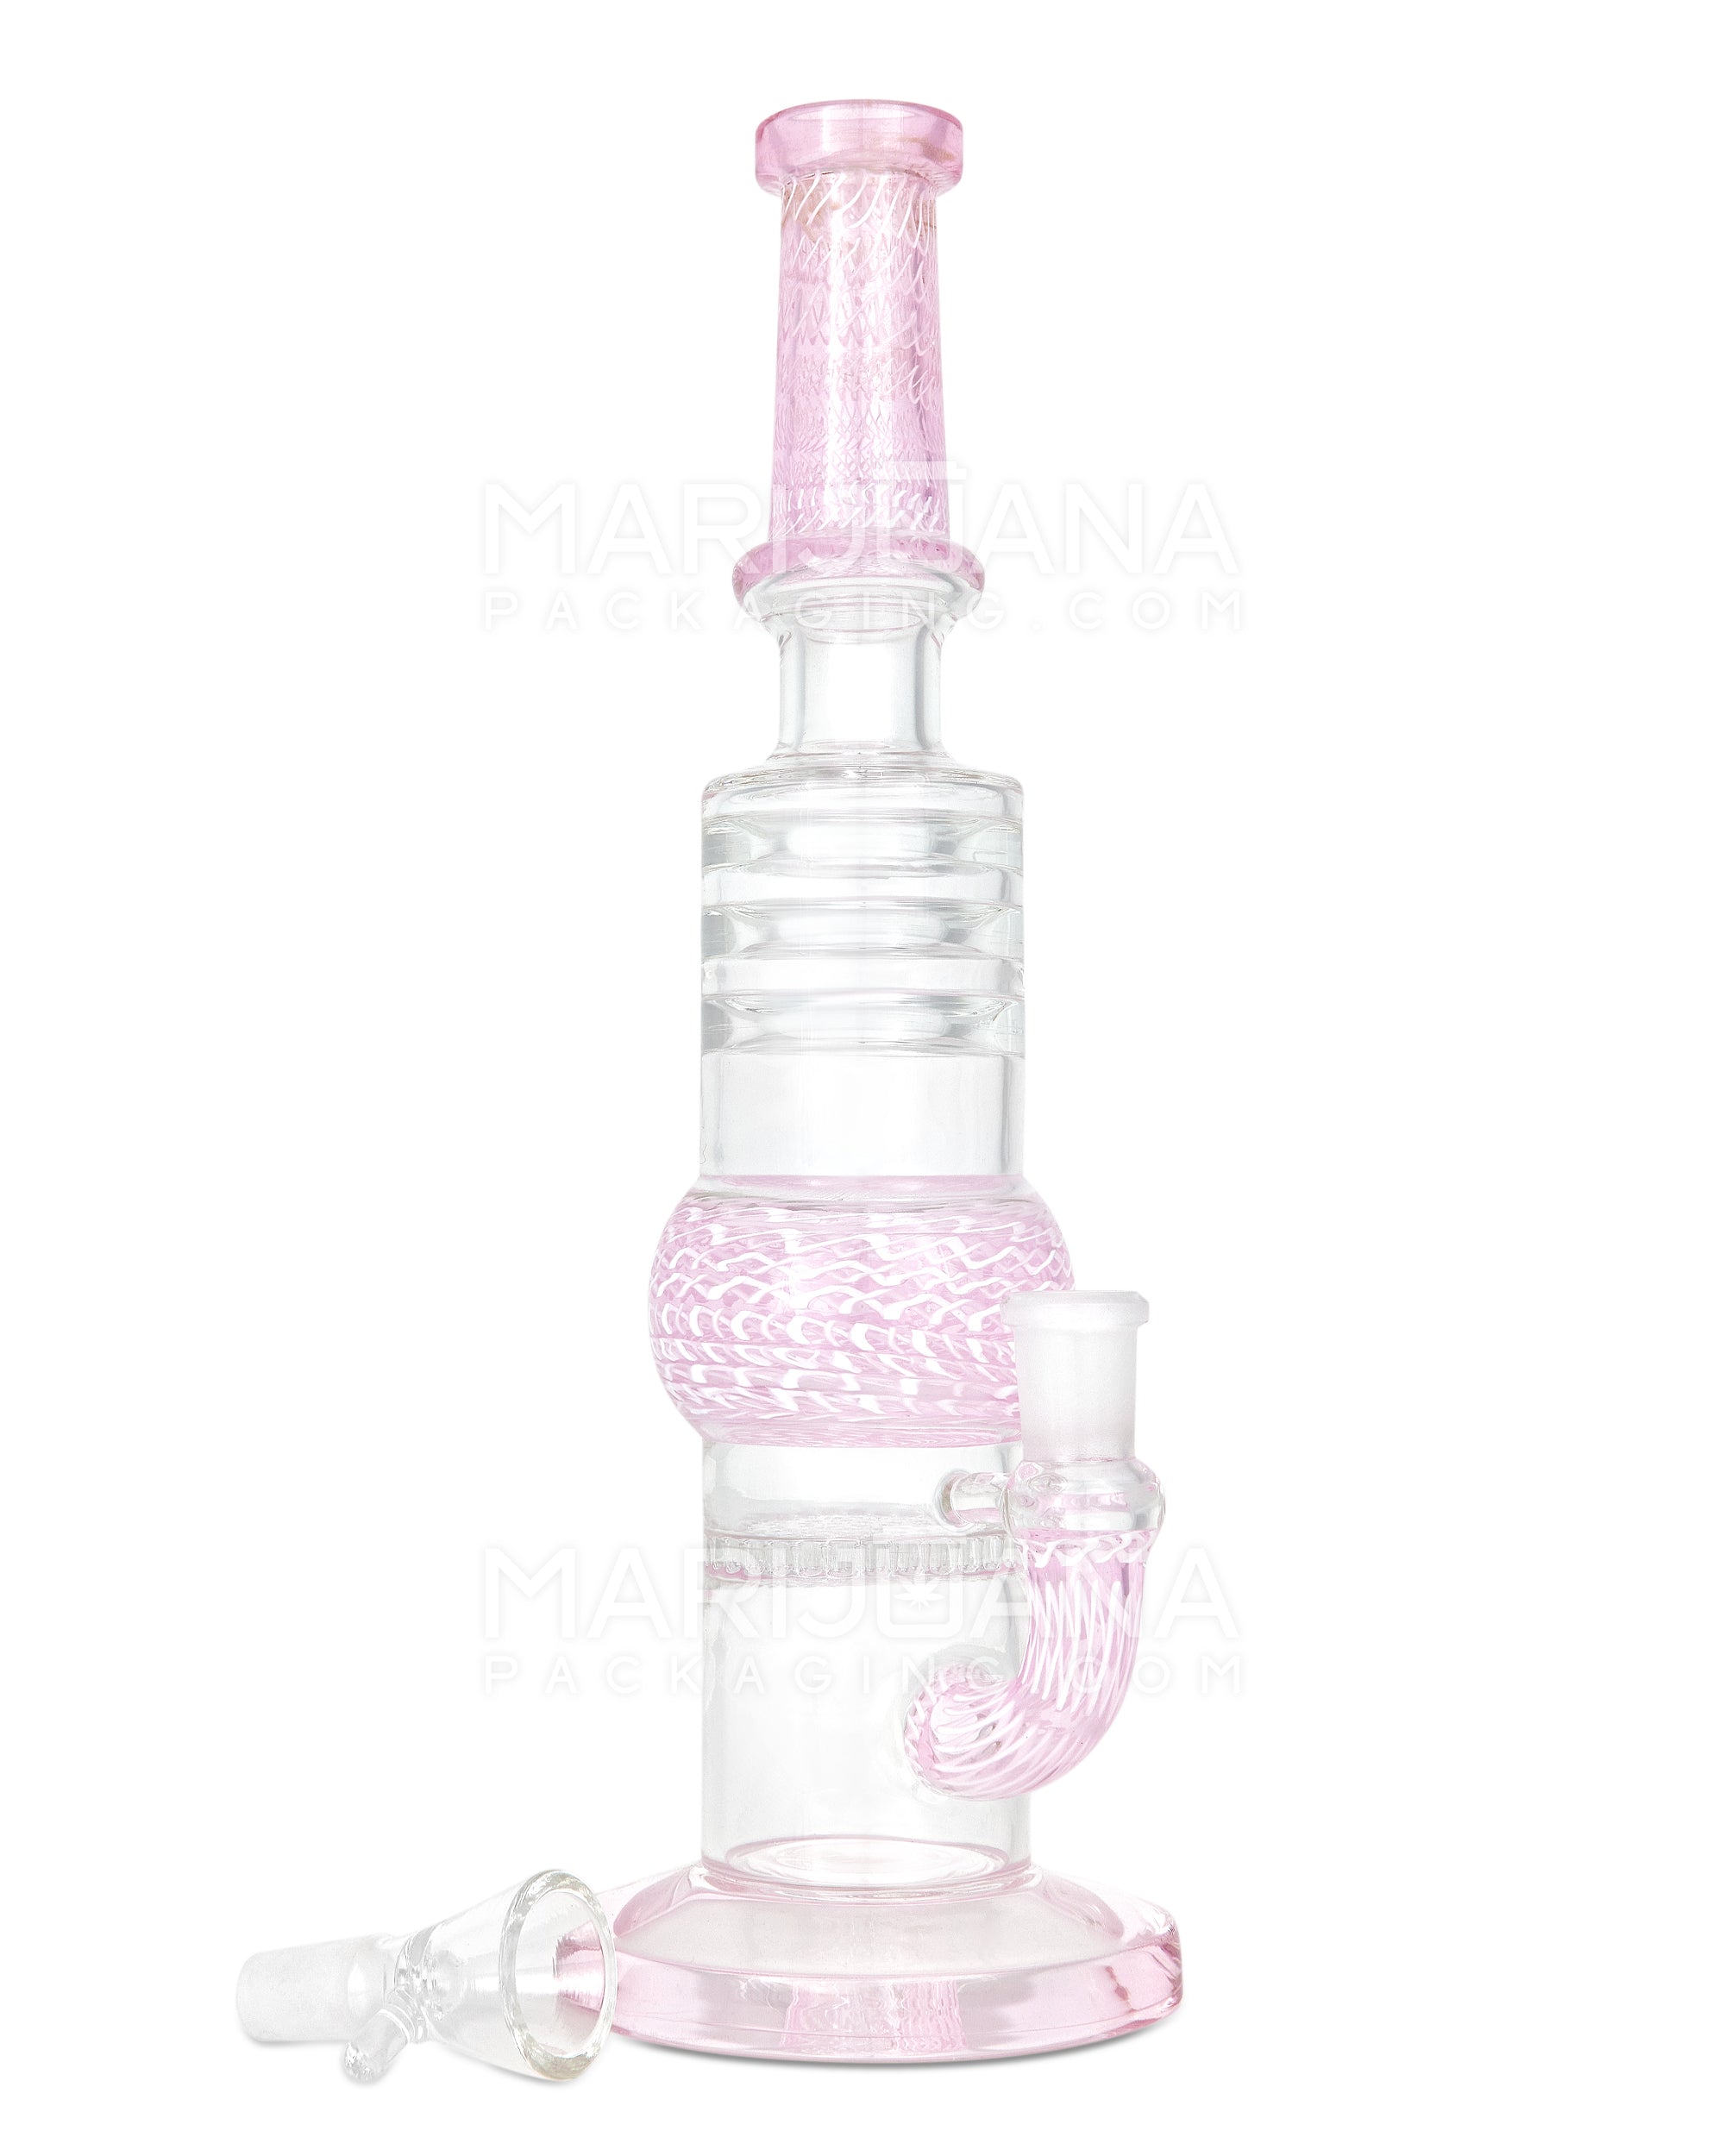 Straight Neck Honeycomb Perc Zanfirico Glass Water Pipe w/ Ice Catcher | 11in Tall - 14mm Bowl - Pink - 2